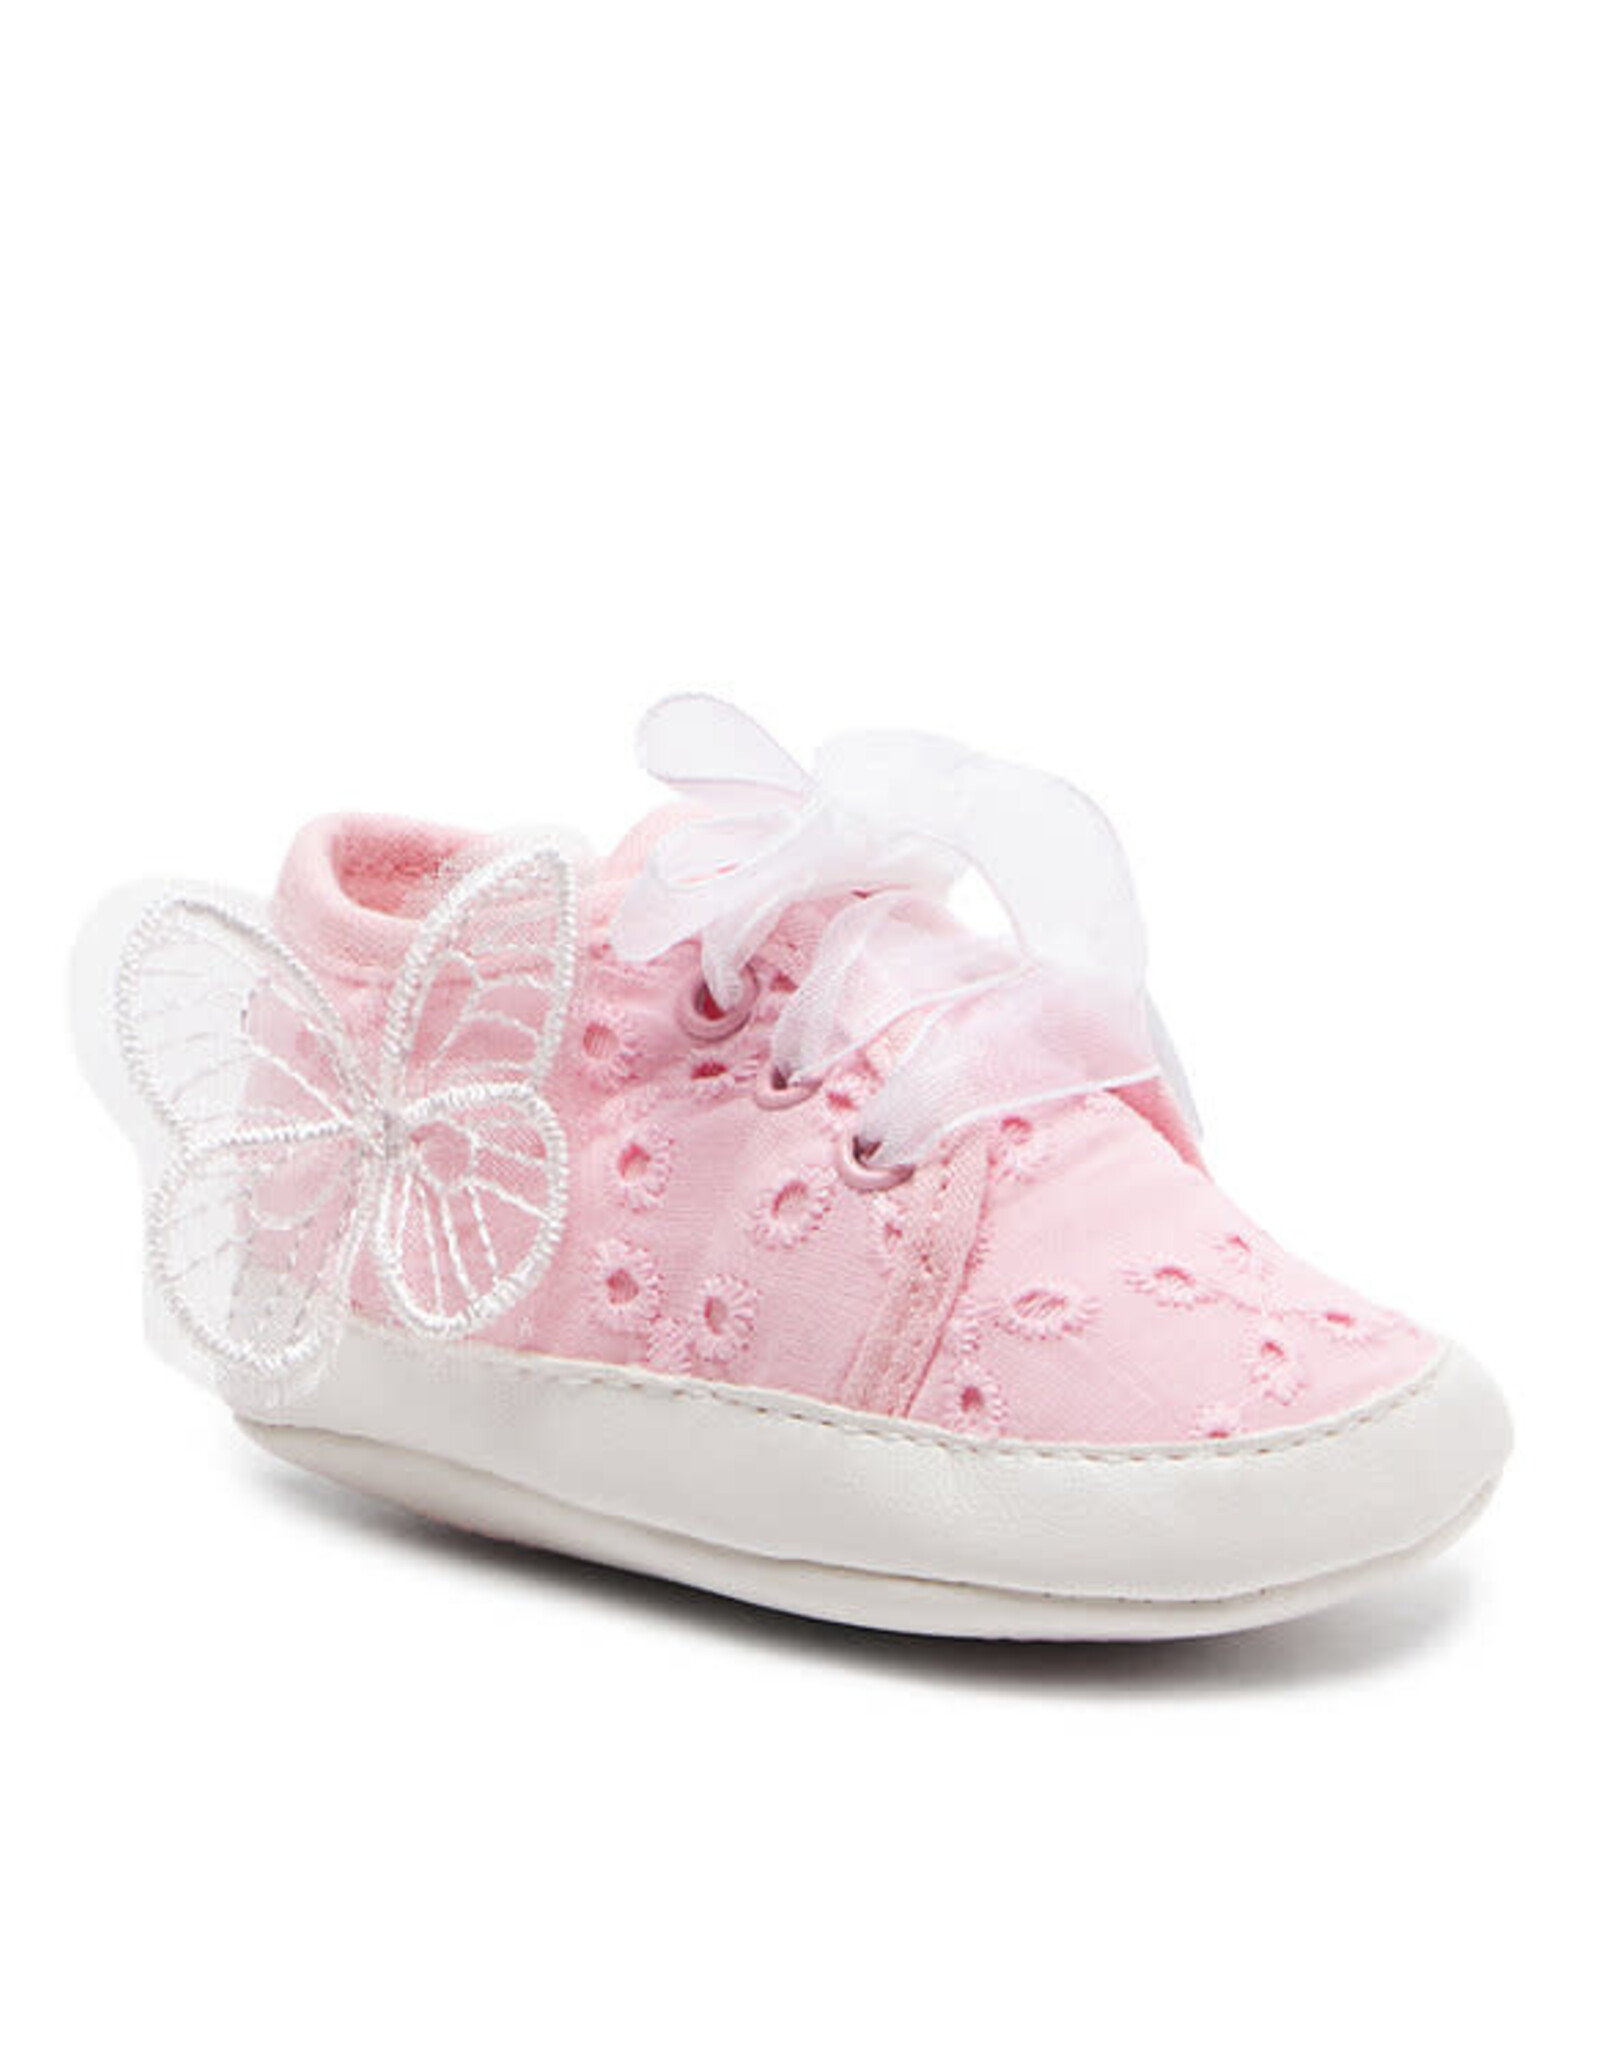 Mayoral Baby Rose Trainning Shoes